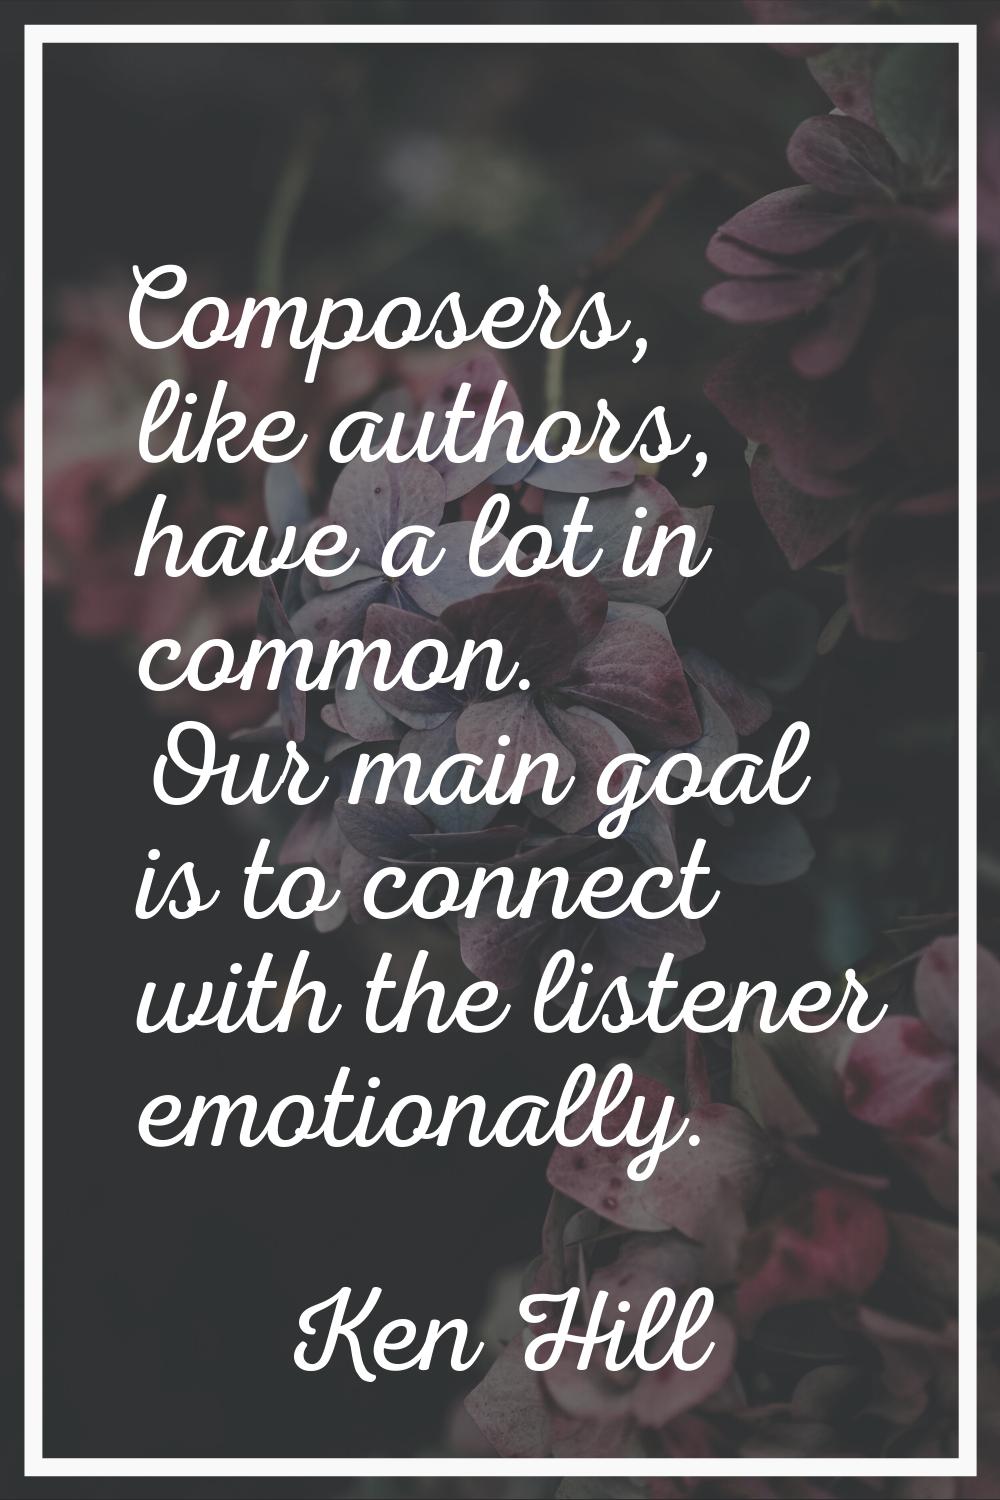 Composers, like authors, have a lot in common. Our main goal is to connect with the listener emotio